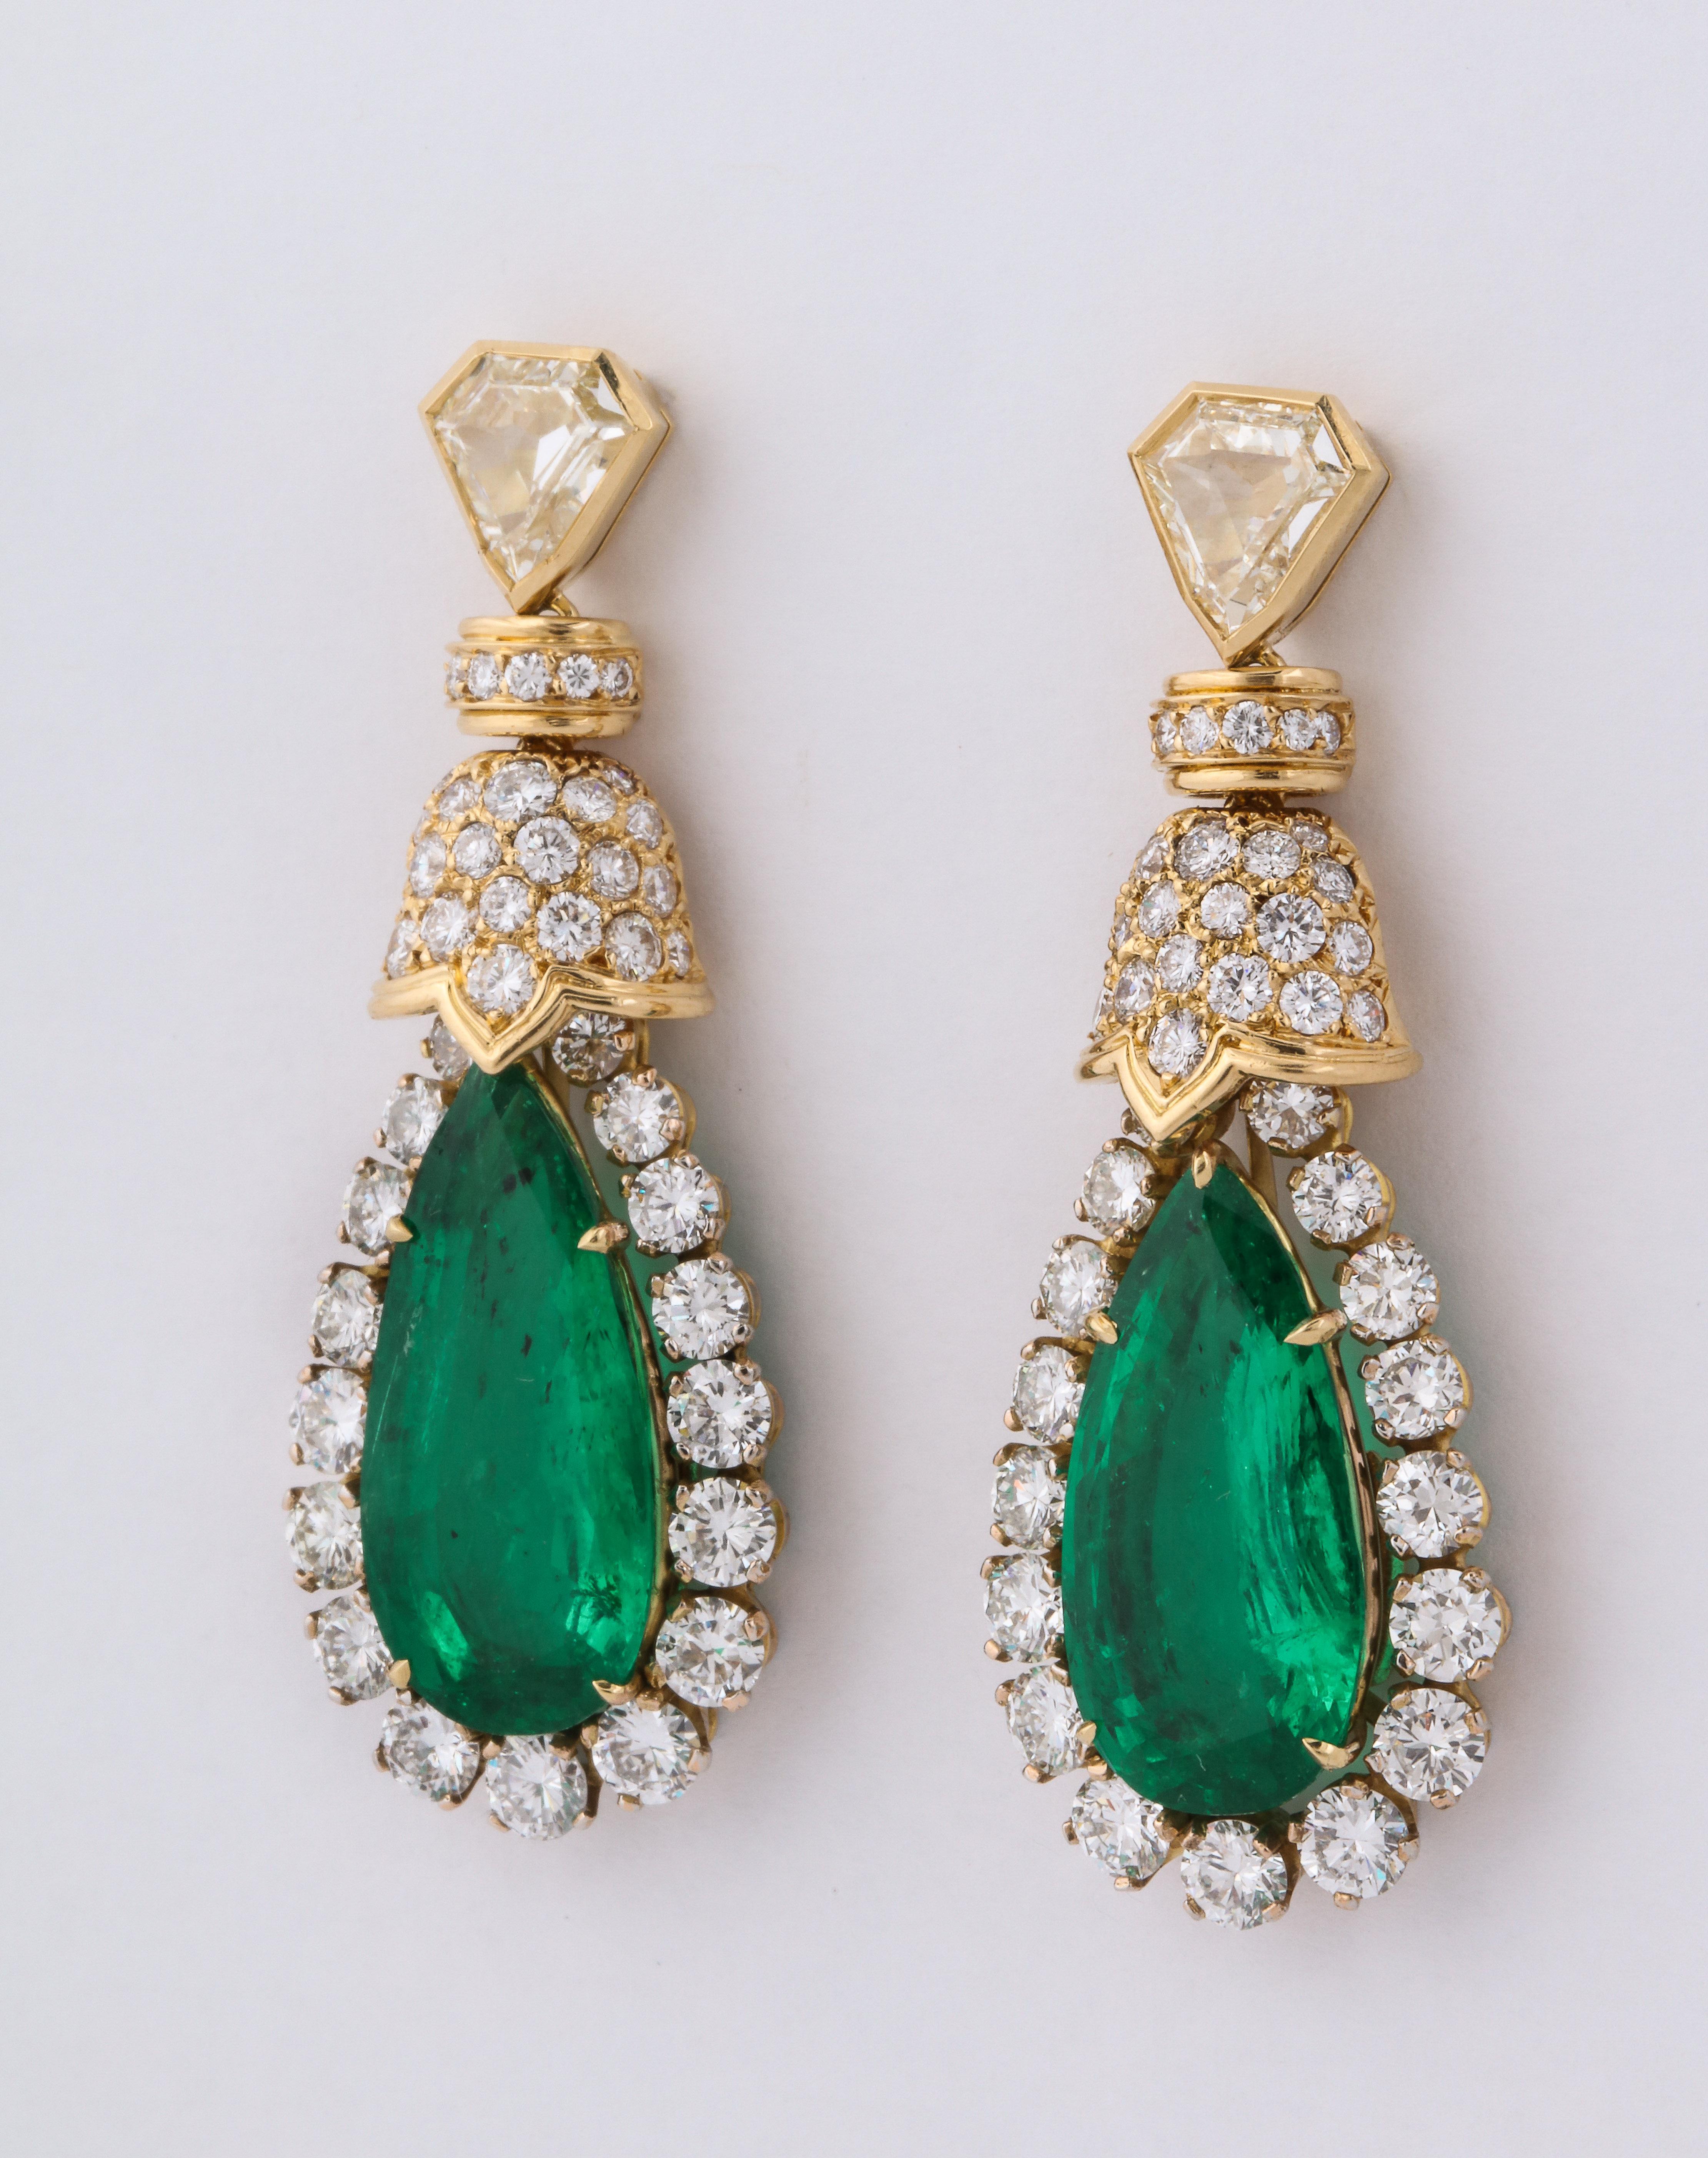 David Webb pear shaped emerald and diamond earrings. 2 pear cut emeralds @ 16 ct tw, 2 kite shaped diamond @ 2 carats J/VVS1, 88 full cut fine white diamonds @ 8.6 cts. 18K gold, 4 gm 22.7 gm. 1 7/8 inches long, 6/8 inches wide, 3/8 inches deep.